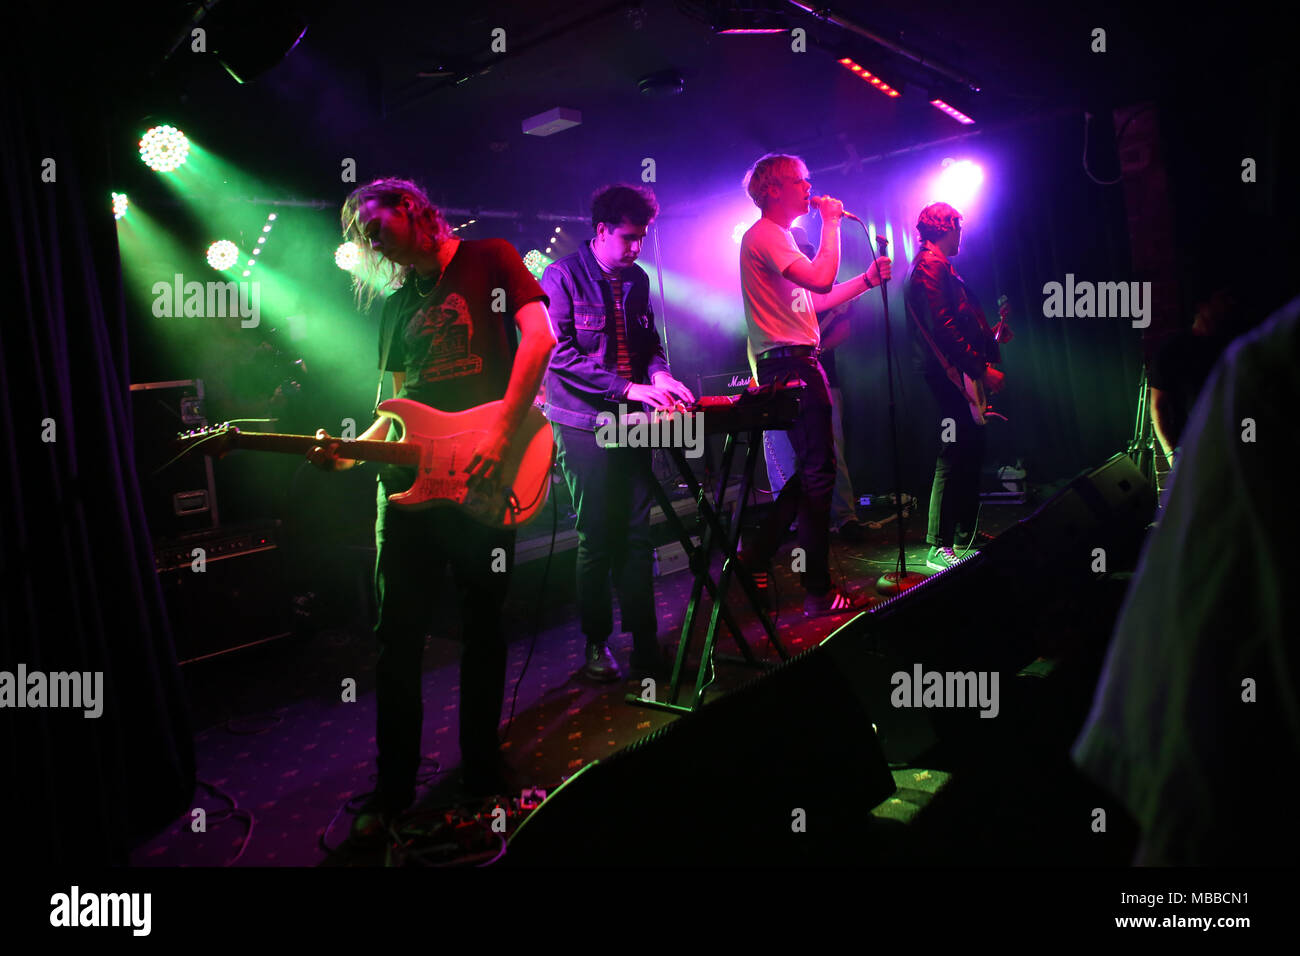 Sydney, Australia. 10 April 2018. Local celebrities and VIPs attend the Neuw Denim form party at The Lansdowne, Sydney. Pictured: Death Bells band. Credit: Richard Milnes/Alamy Live News Stock Photo